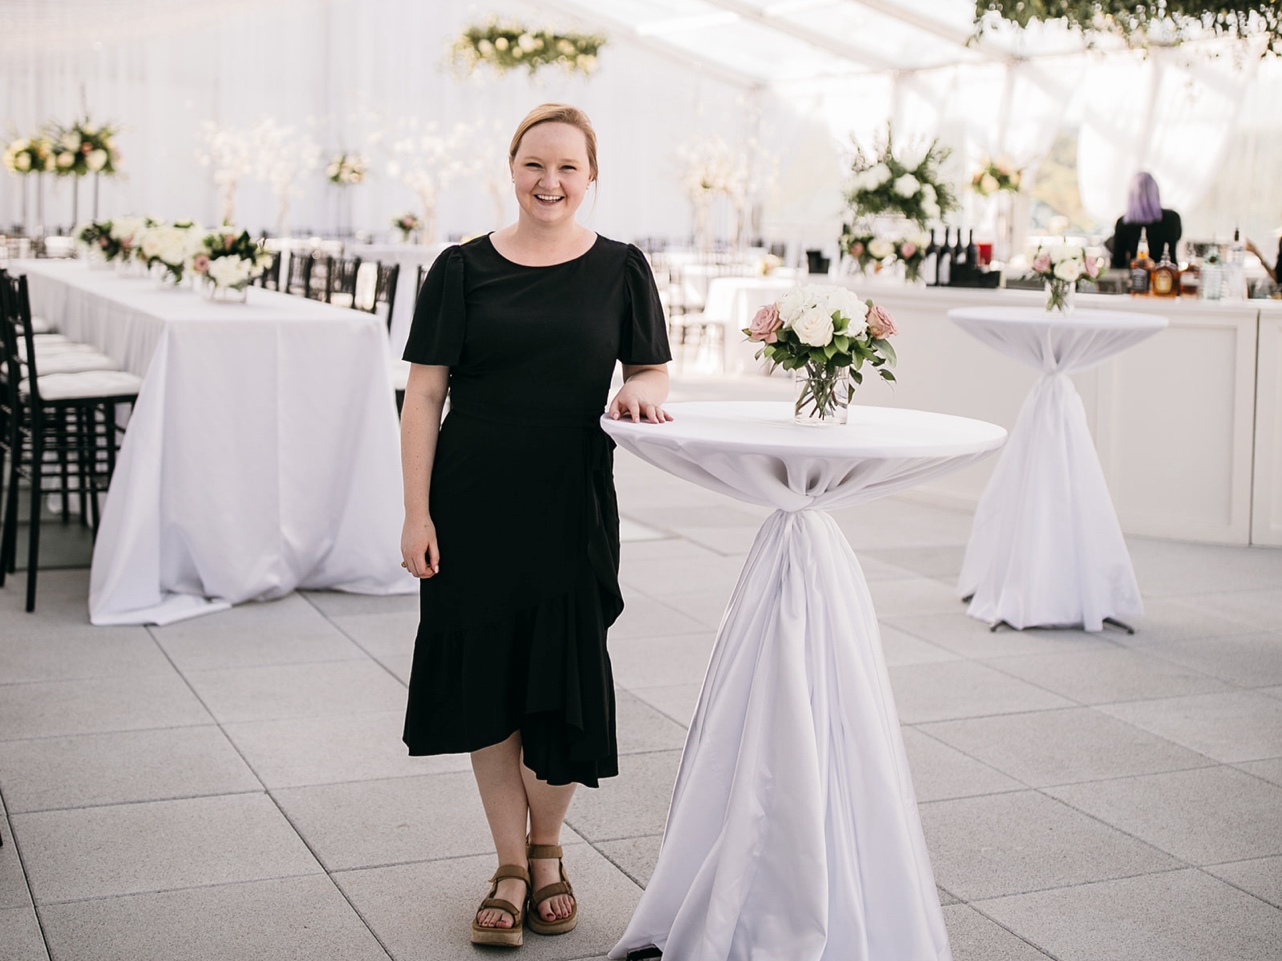 A wedding planner smiles and leans against a cocktail table in an empty reception space.